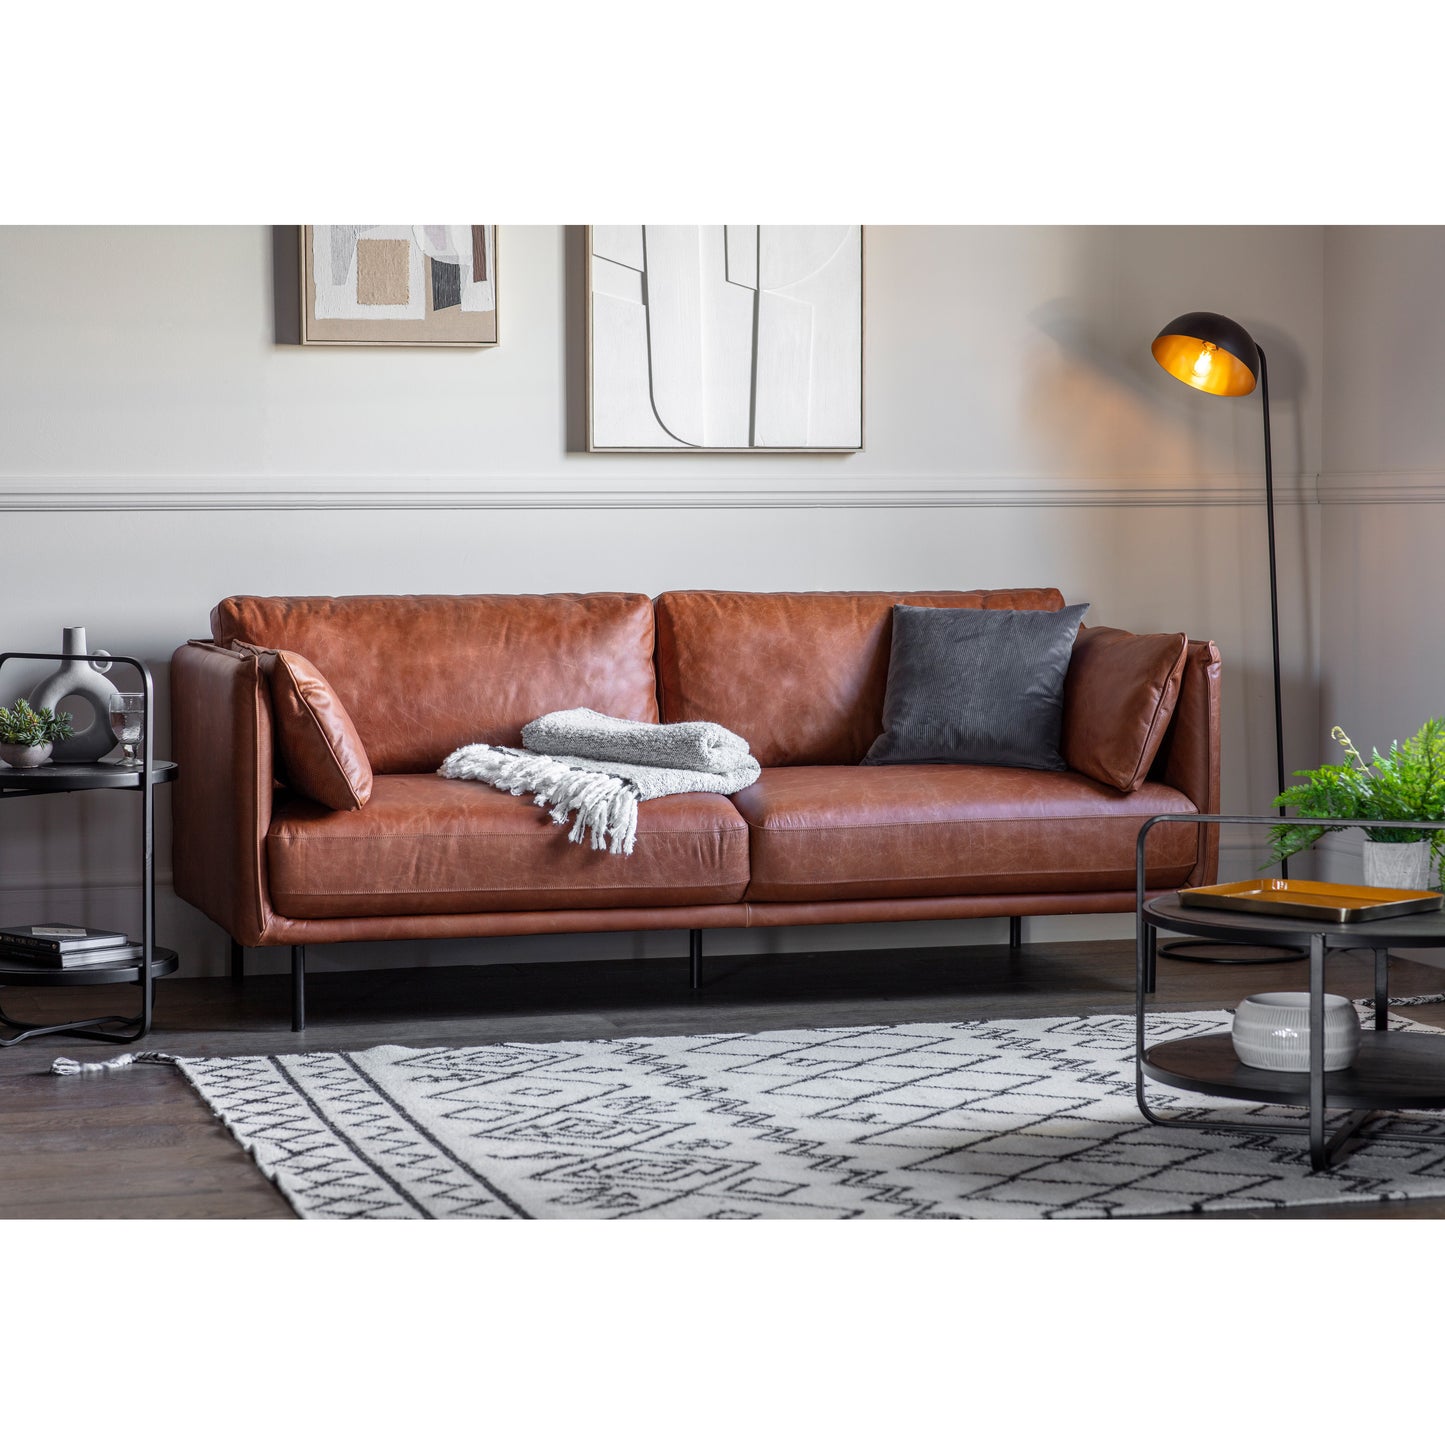 A Wigmore Sofa Brown Leather in a living room, part of the home furniture collection from Kikiathome.co.uk.